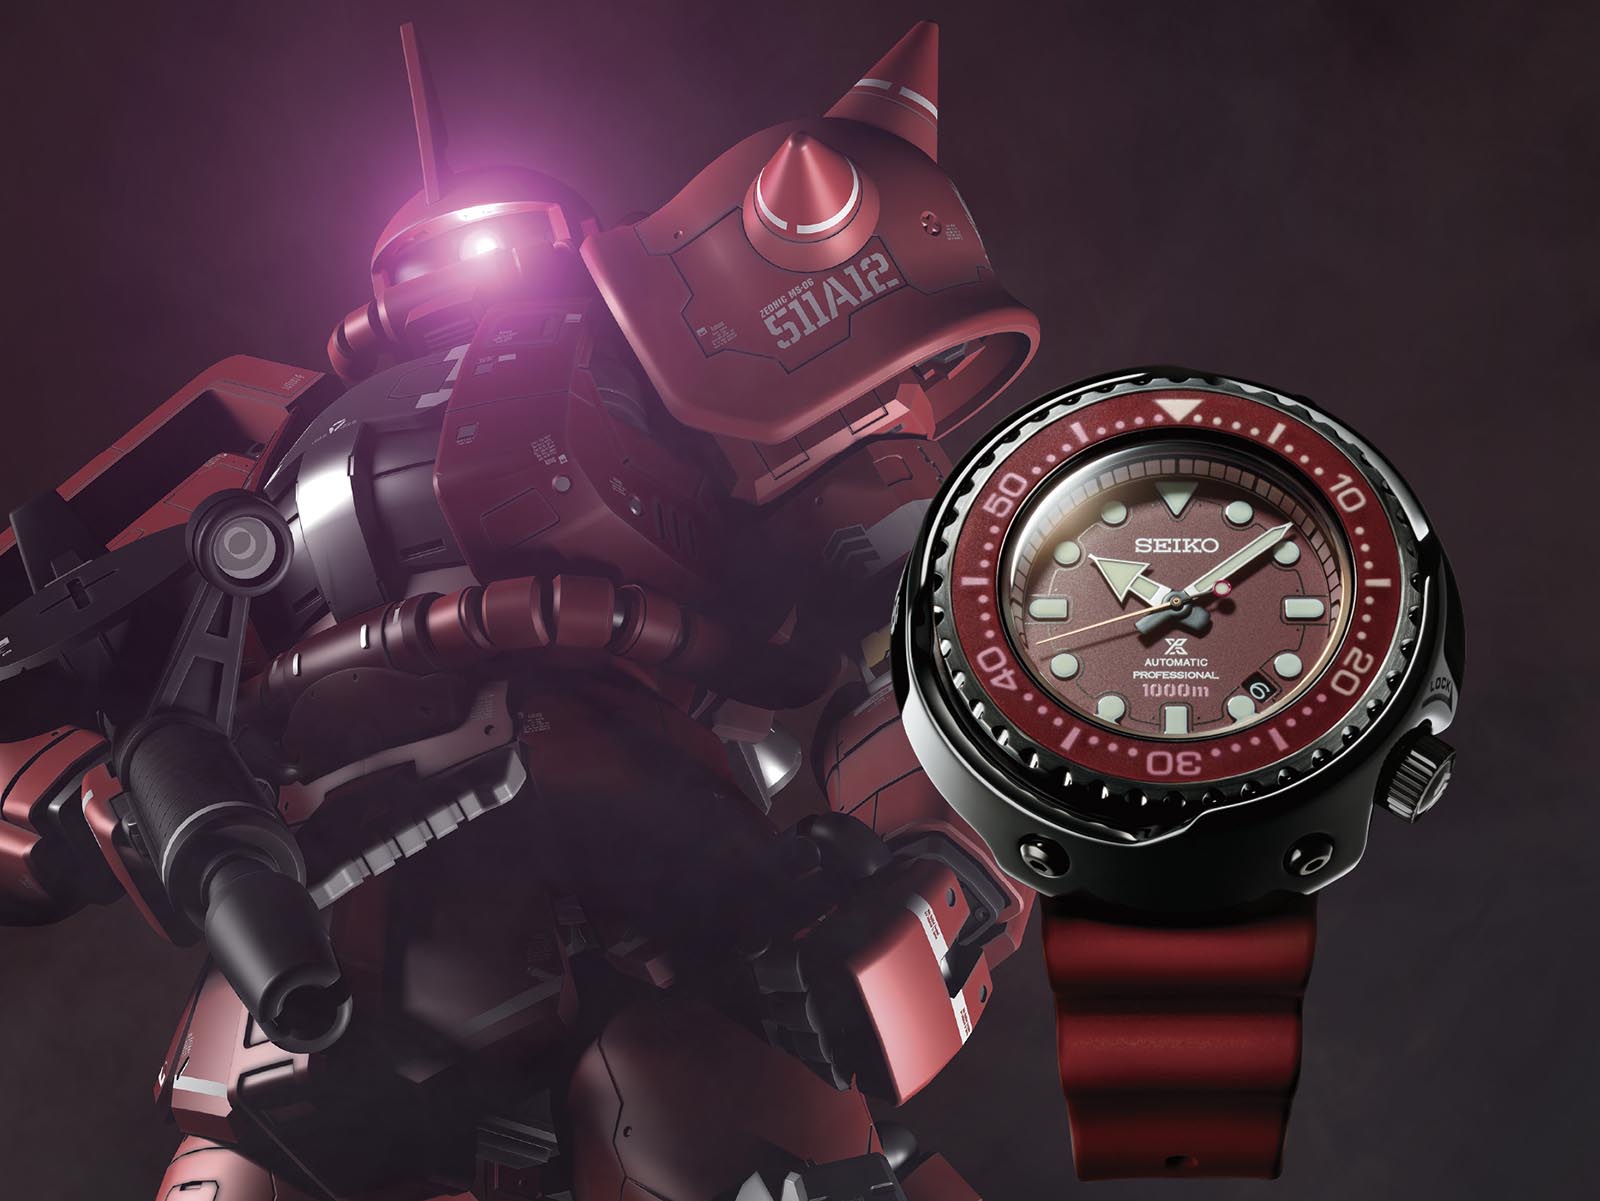 Seiko Goes Full Robot with the Gundam 40th Anniversary Limited Editions |  SJX Watches